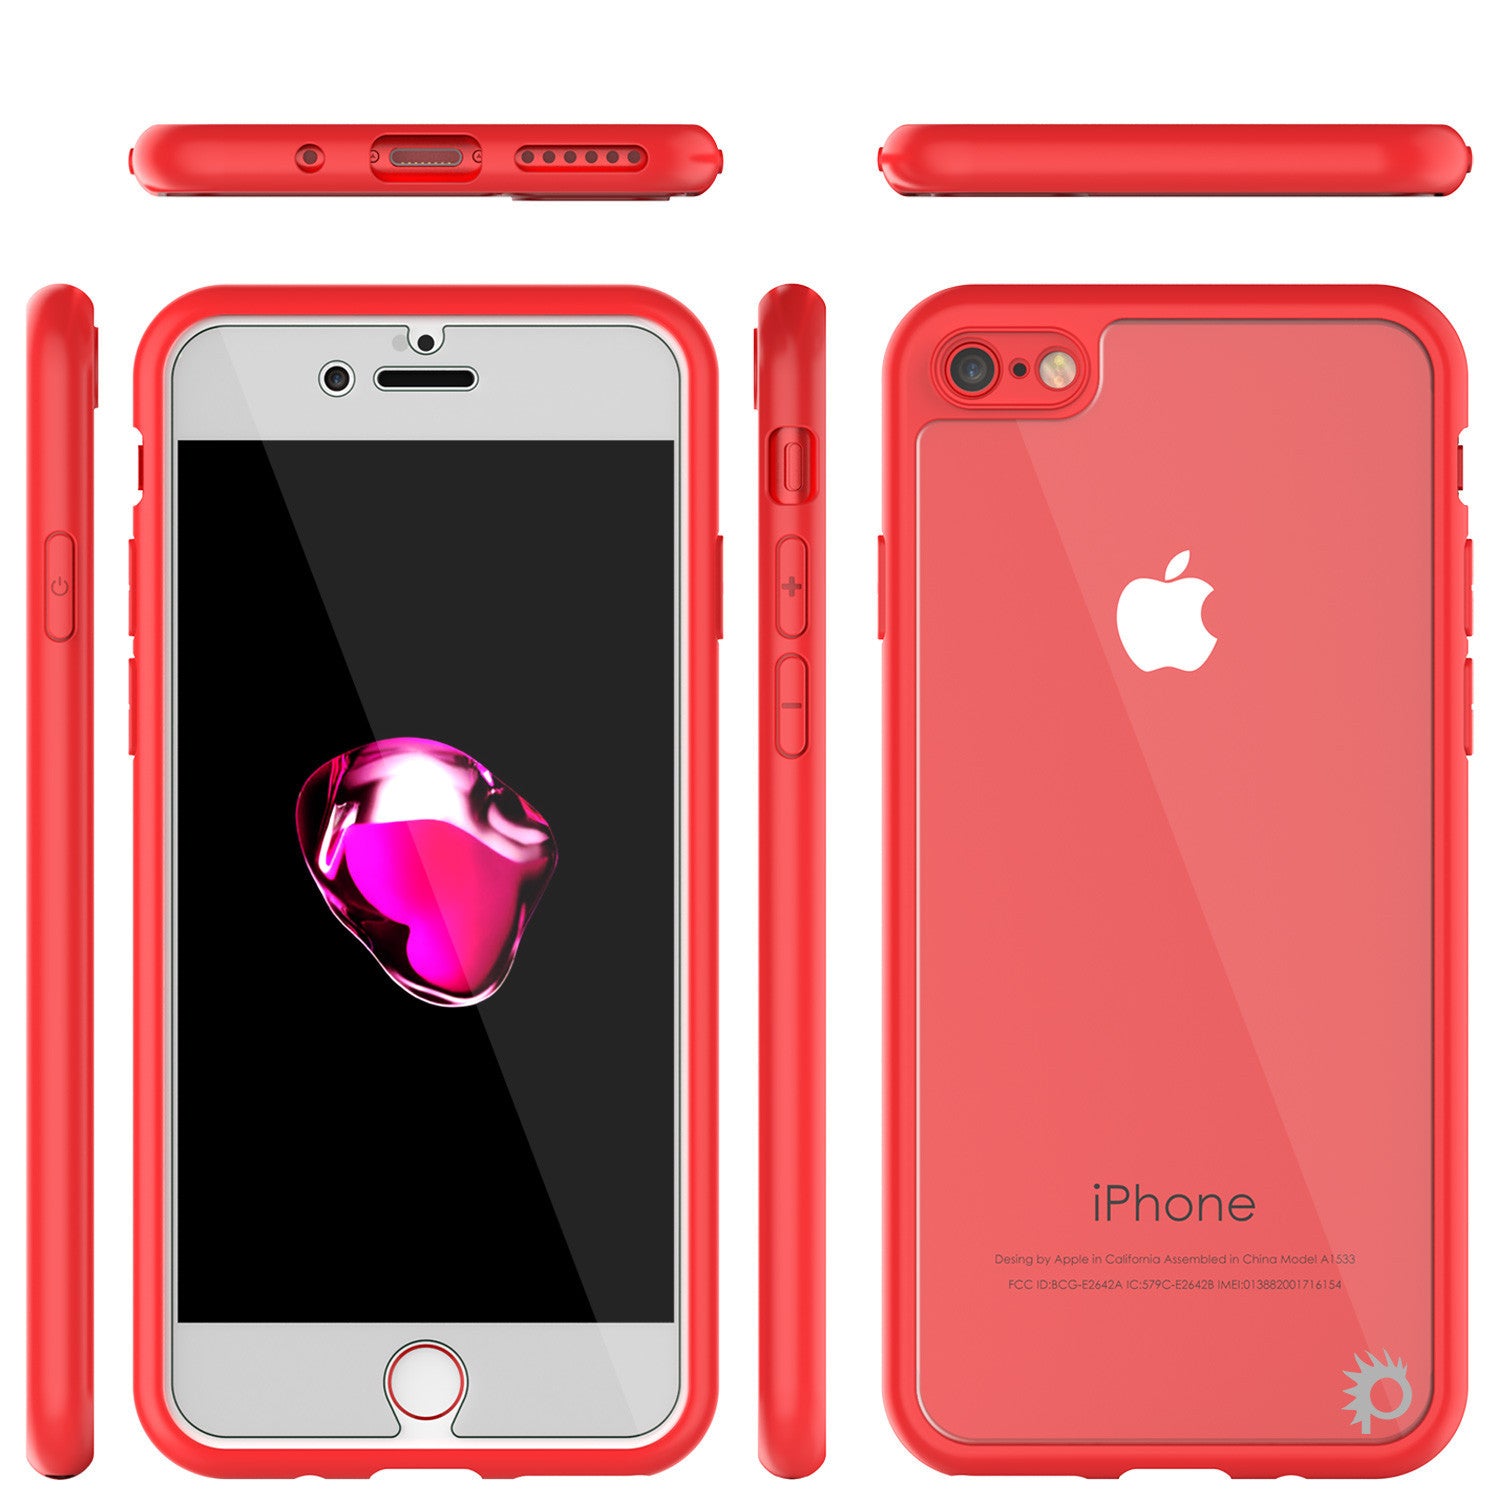 iPhone 7 Case, Punkcase [MASK Series] [RED] Full Body Hybrid Dual Layer TPU Cover protective Tempered Glass Screen Protector